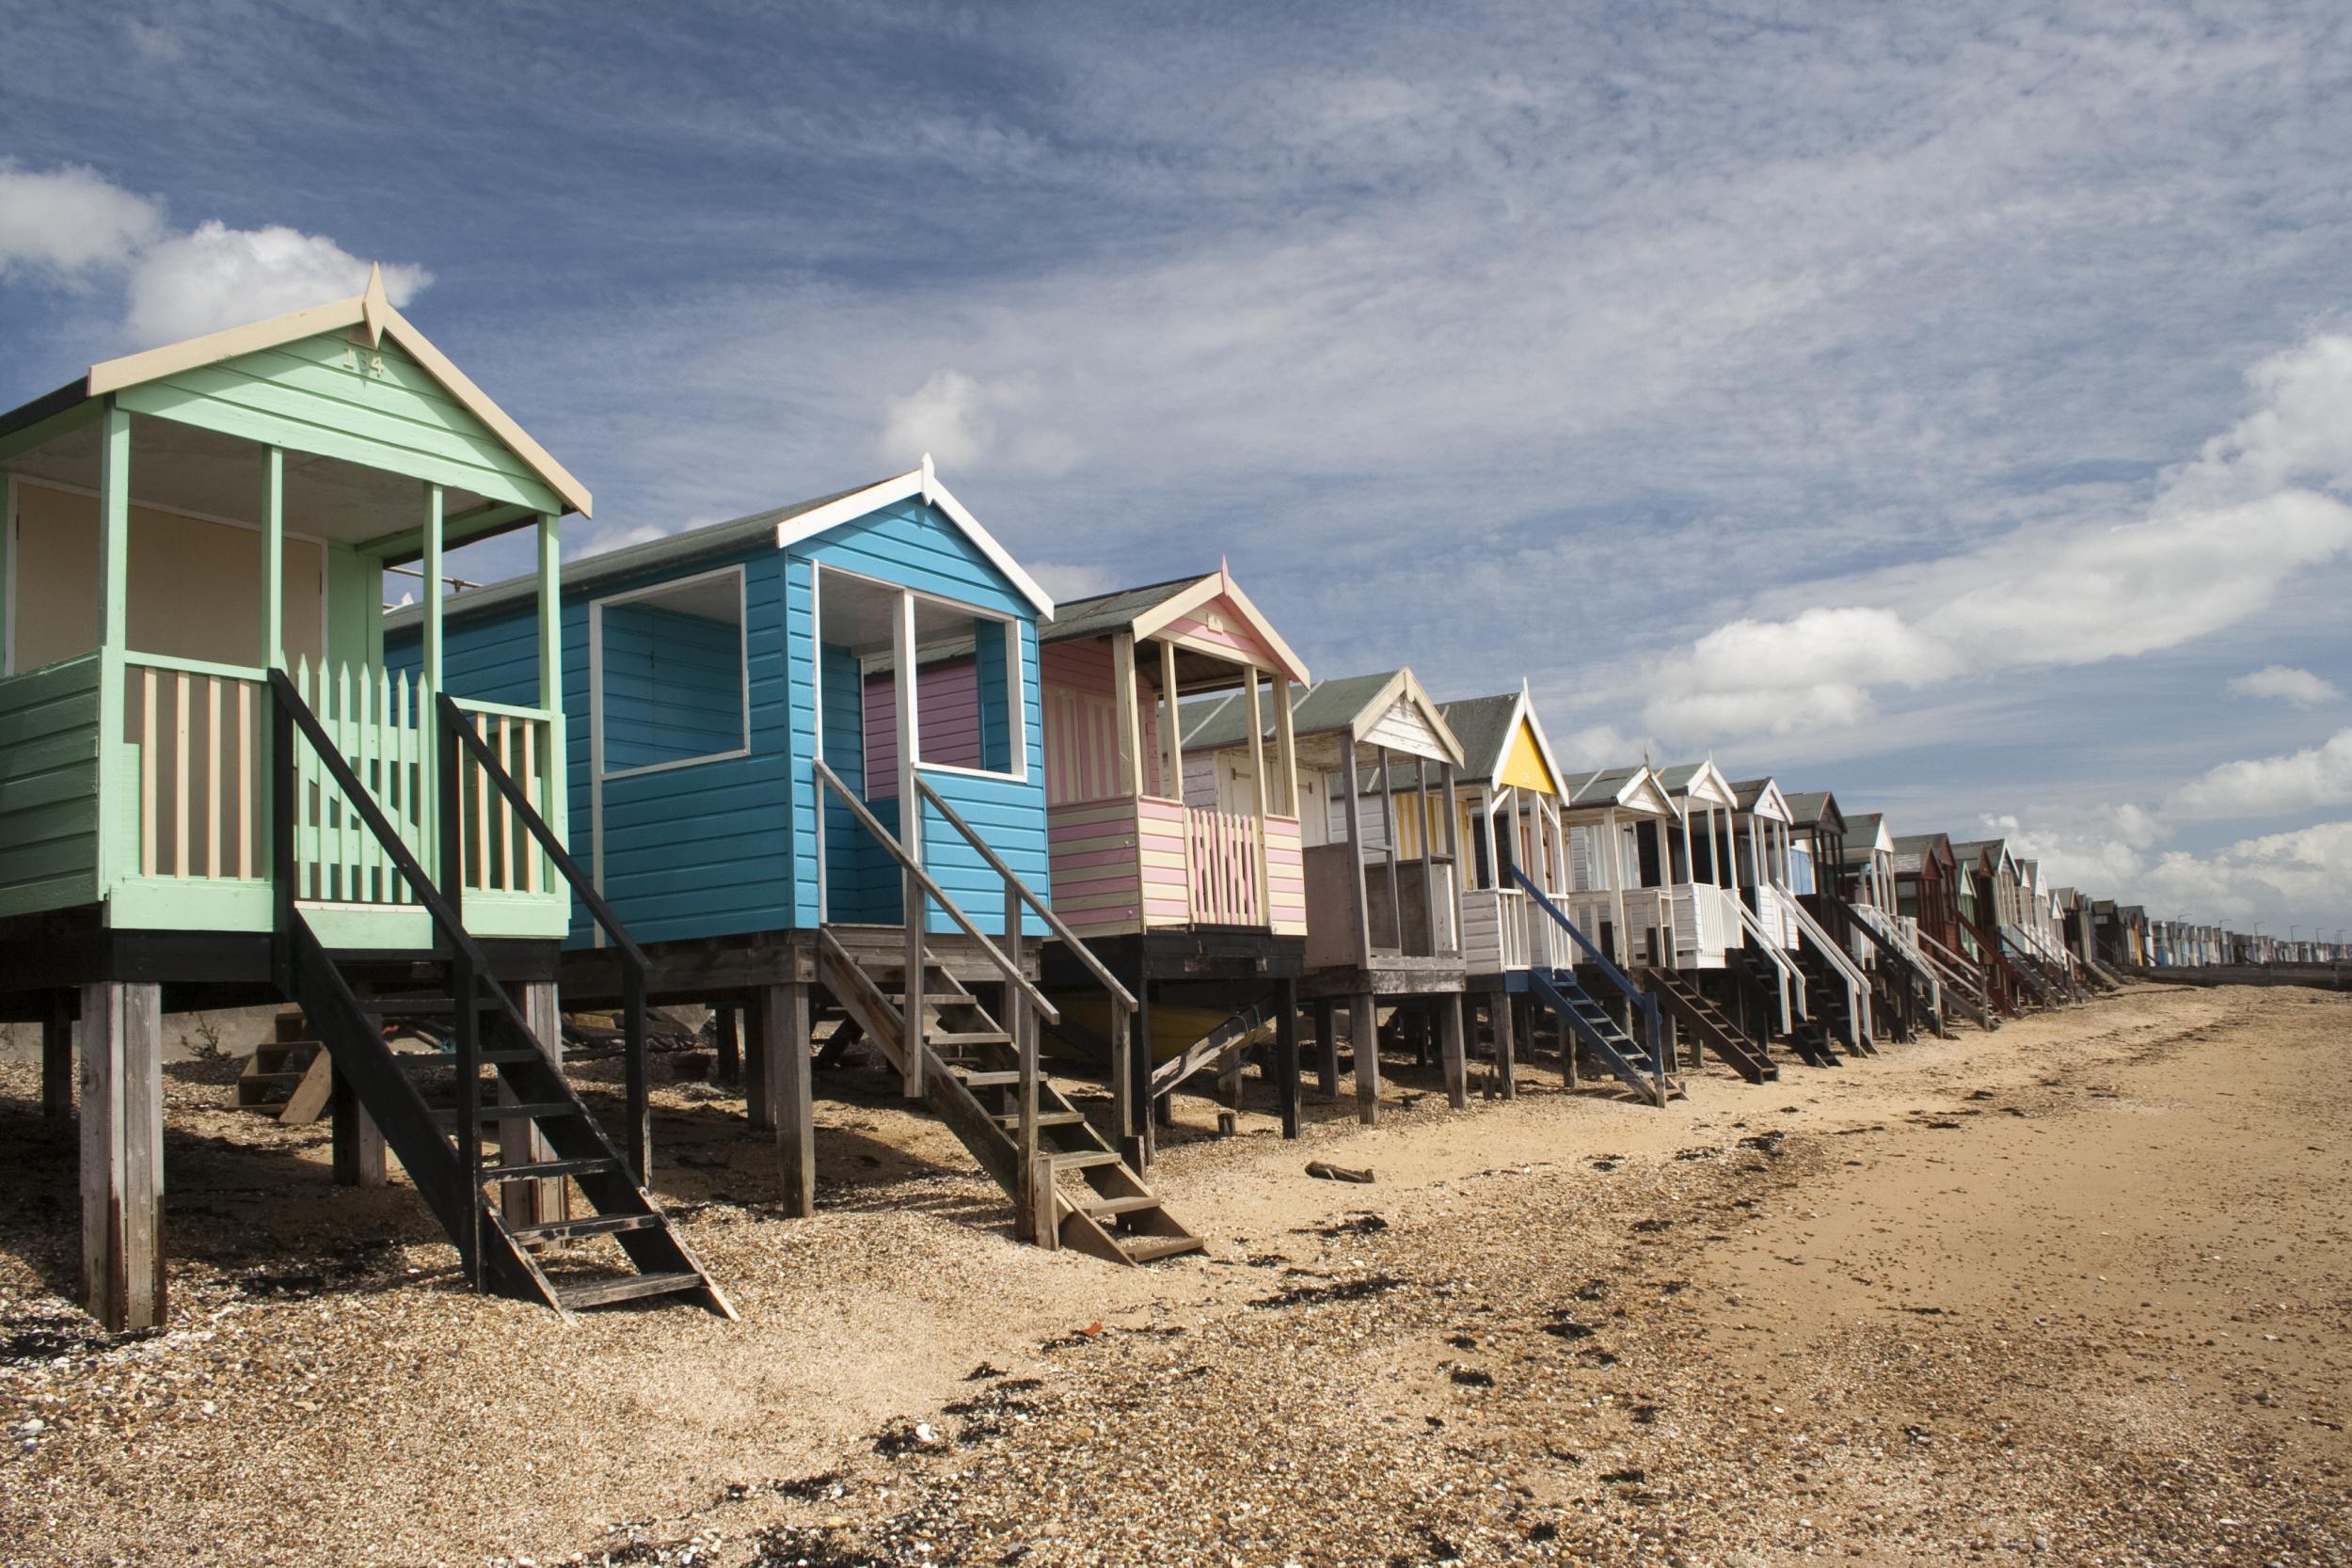 Traditional beach huts at Thorpe Bay,?near a convenient airport?(iStock)